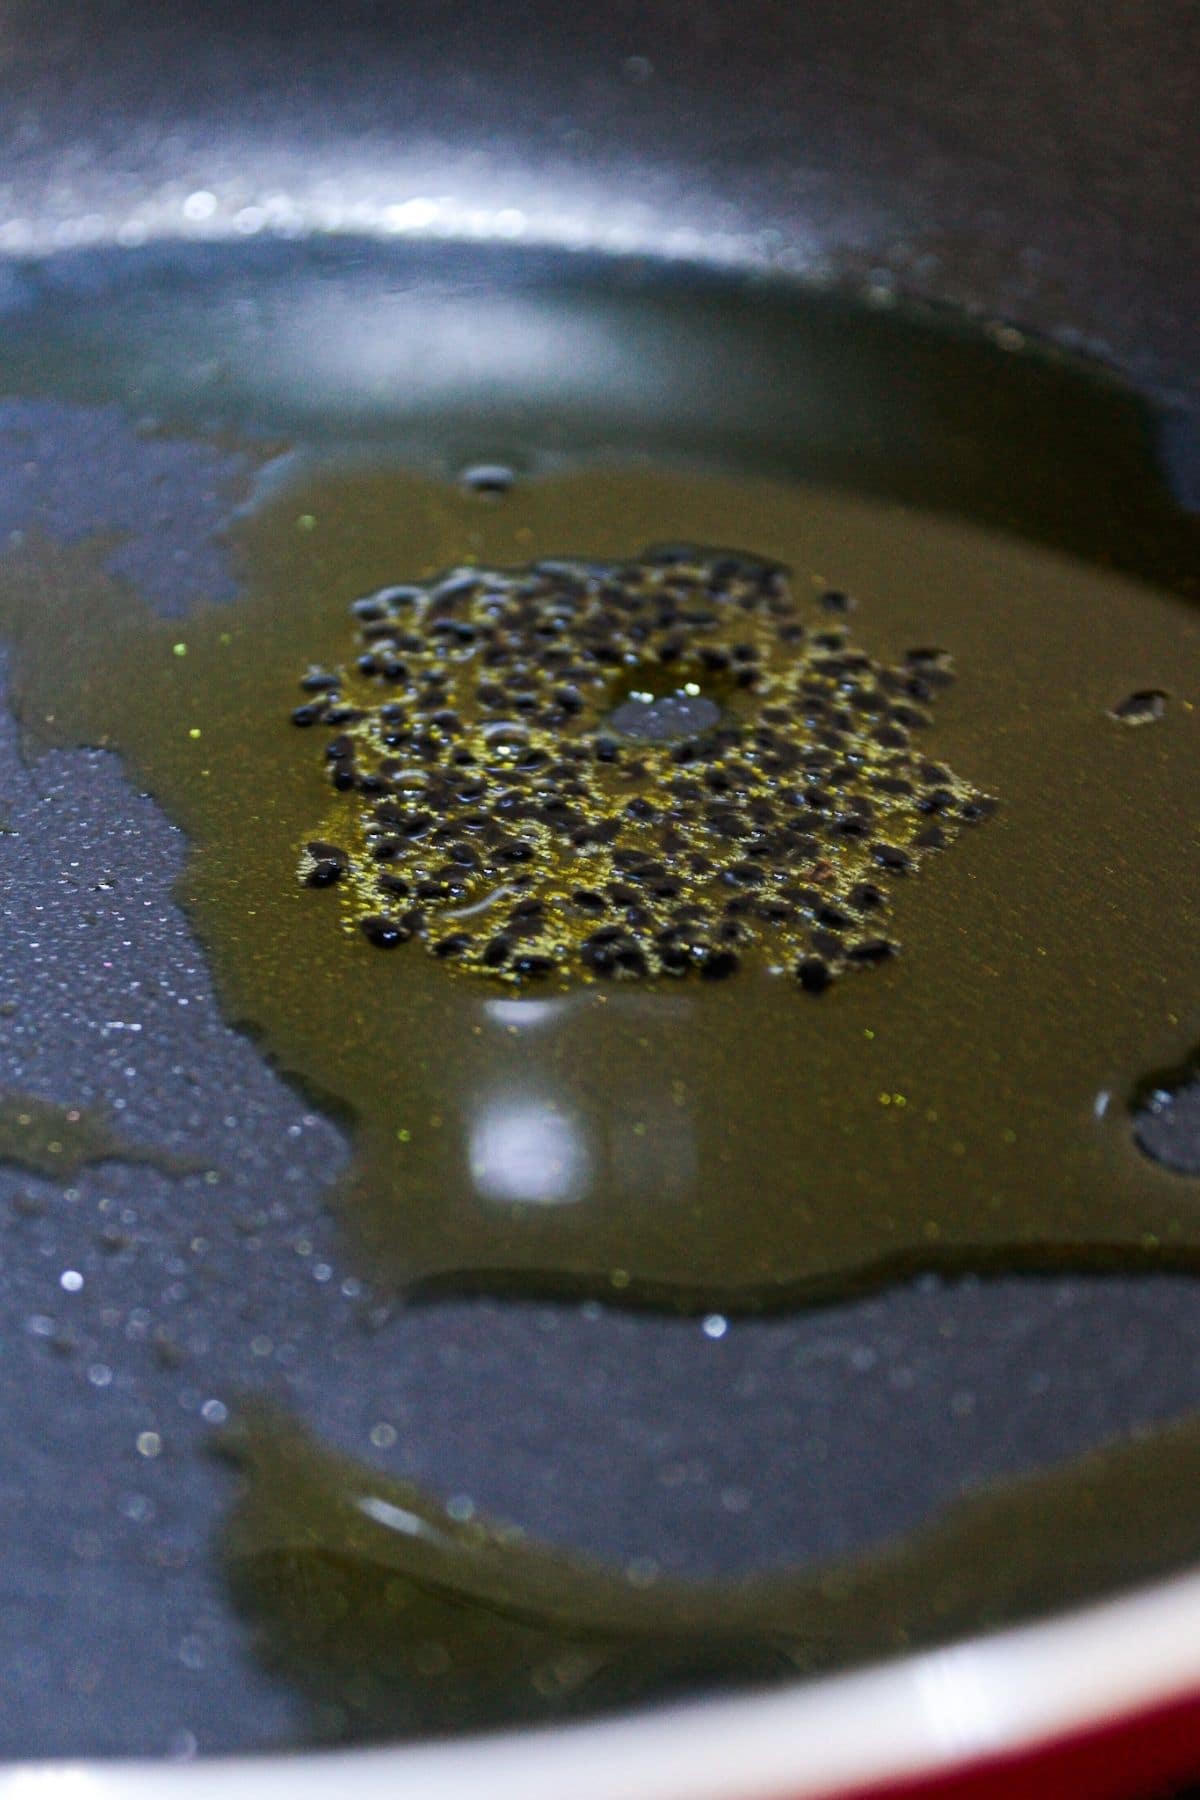 Oil and seeds in skillet